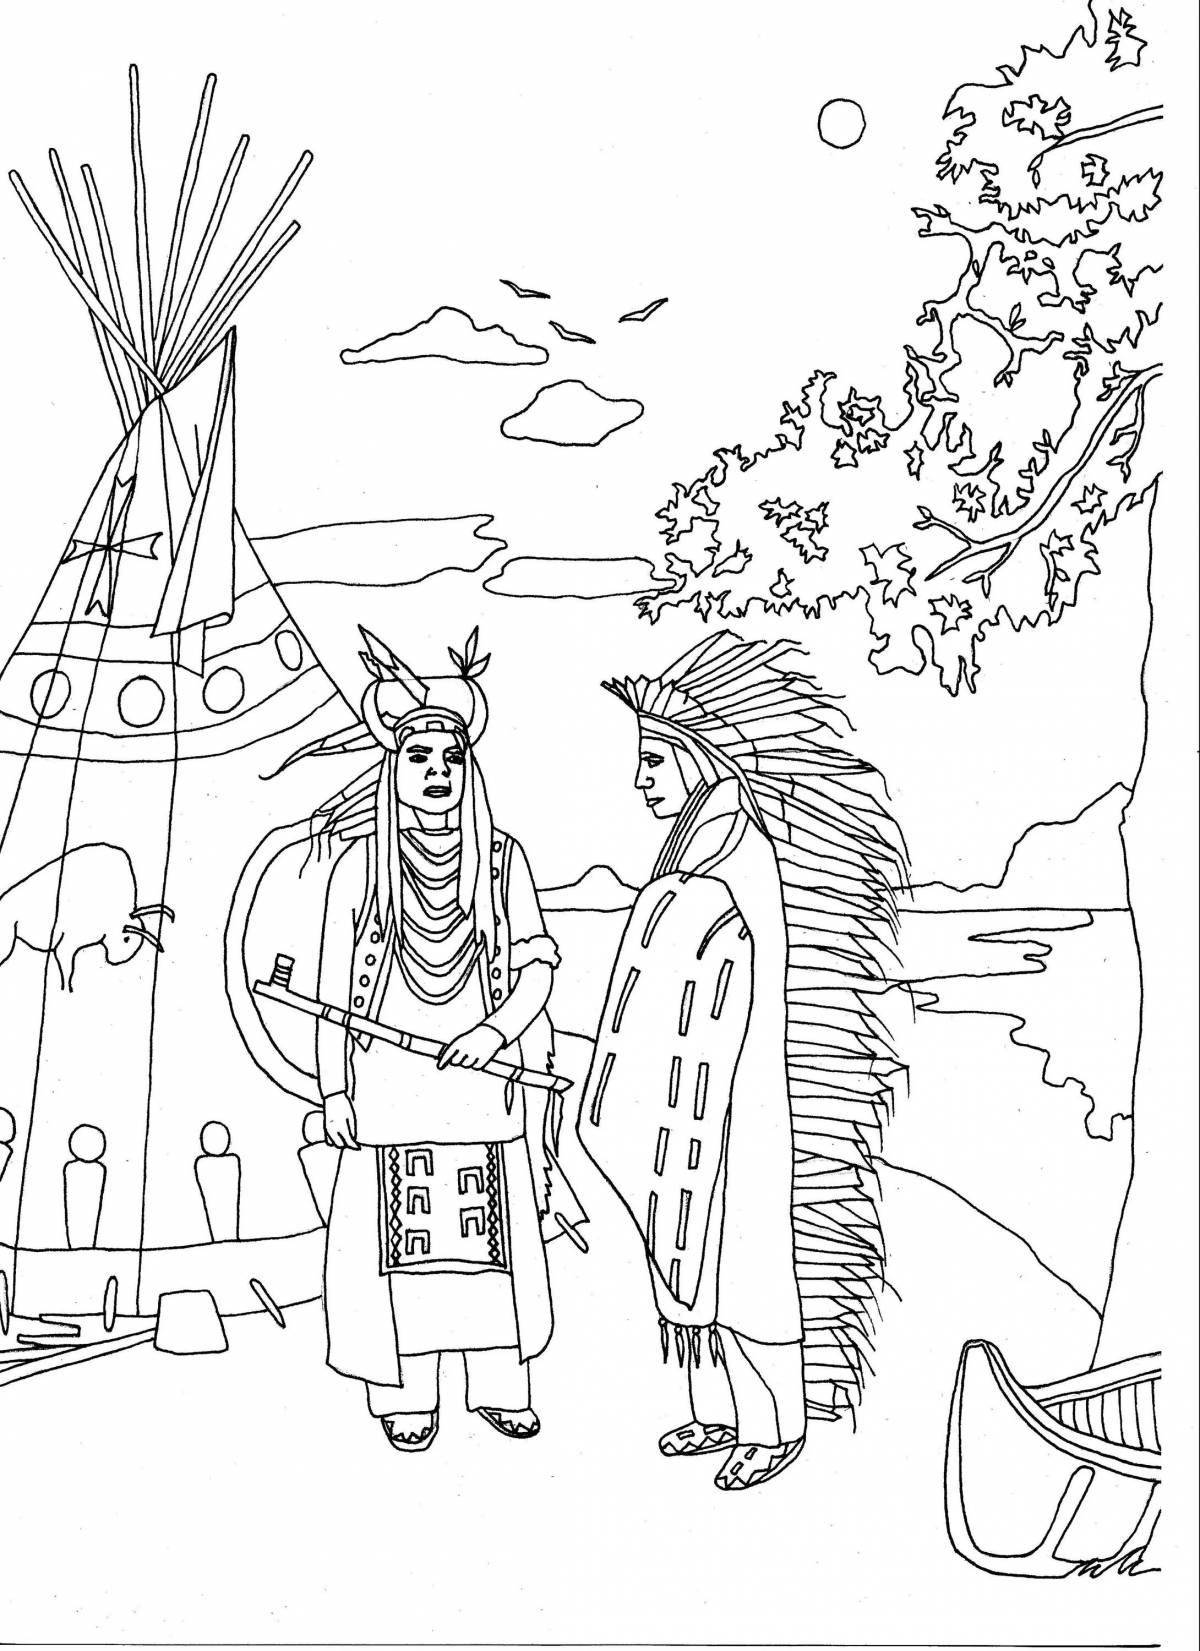 Attractive Indian coloring pages